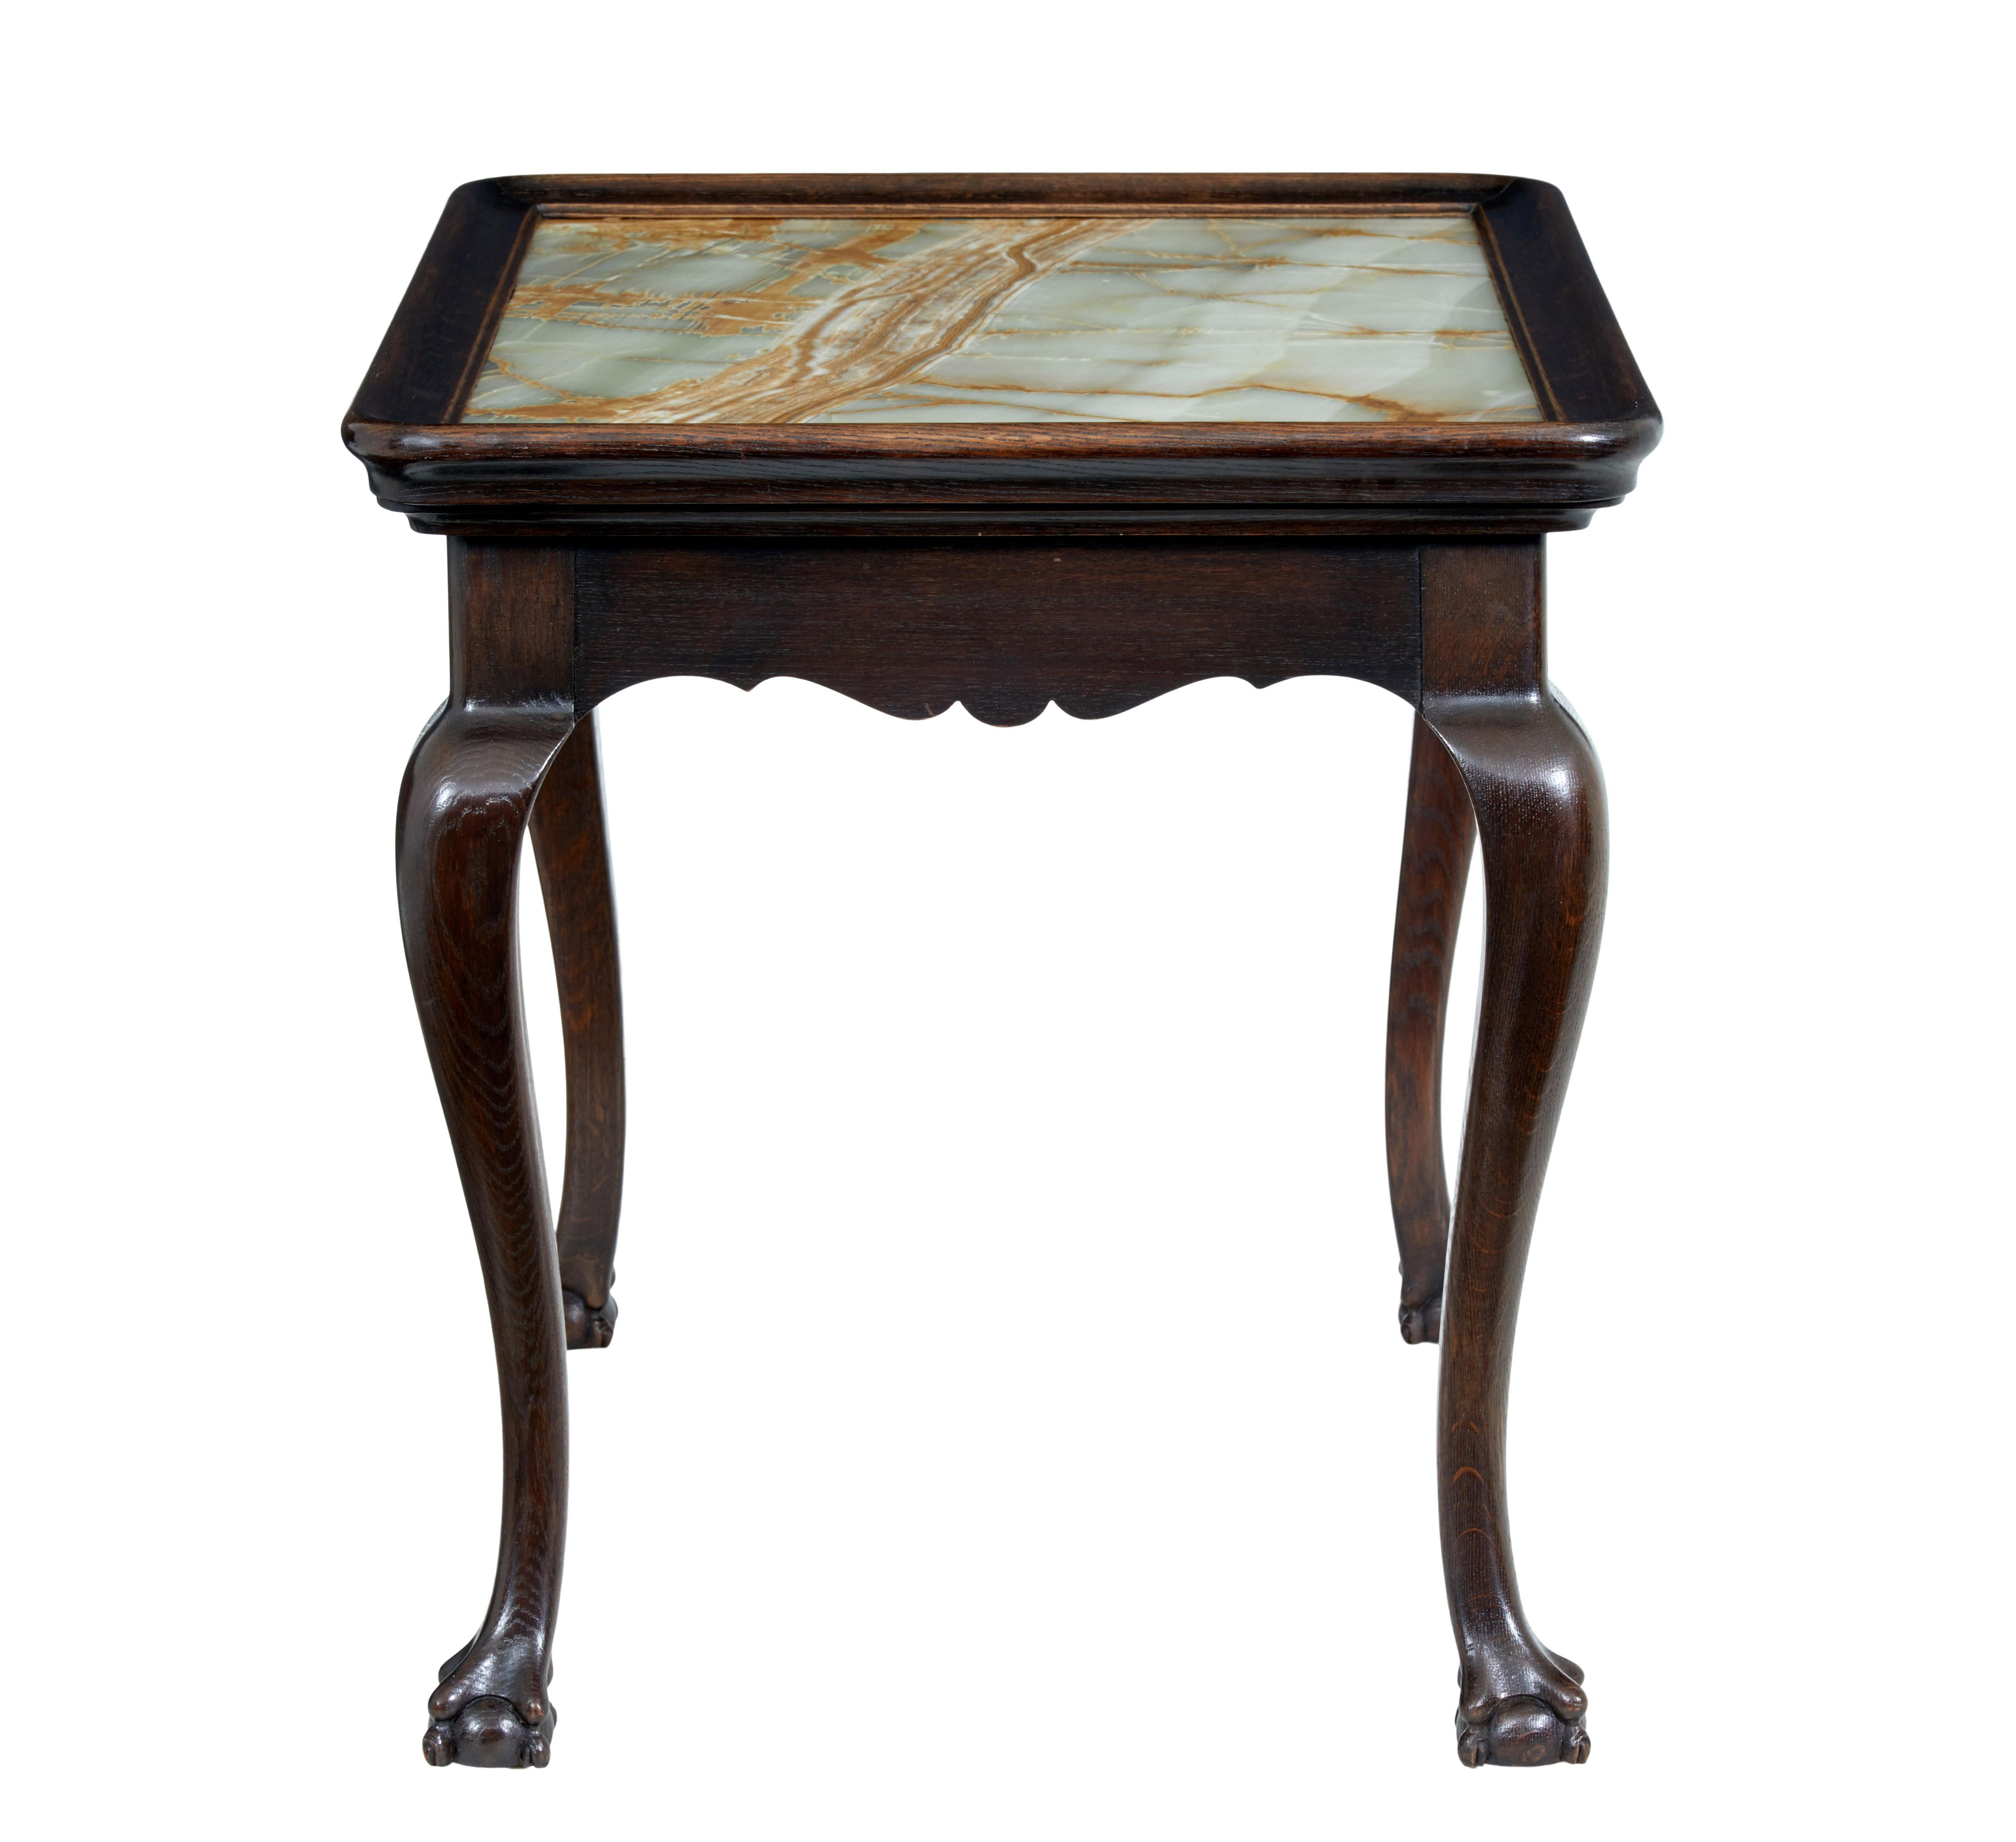 English 19th Century Oak Chippendale Influenced Onyx Top Table